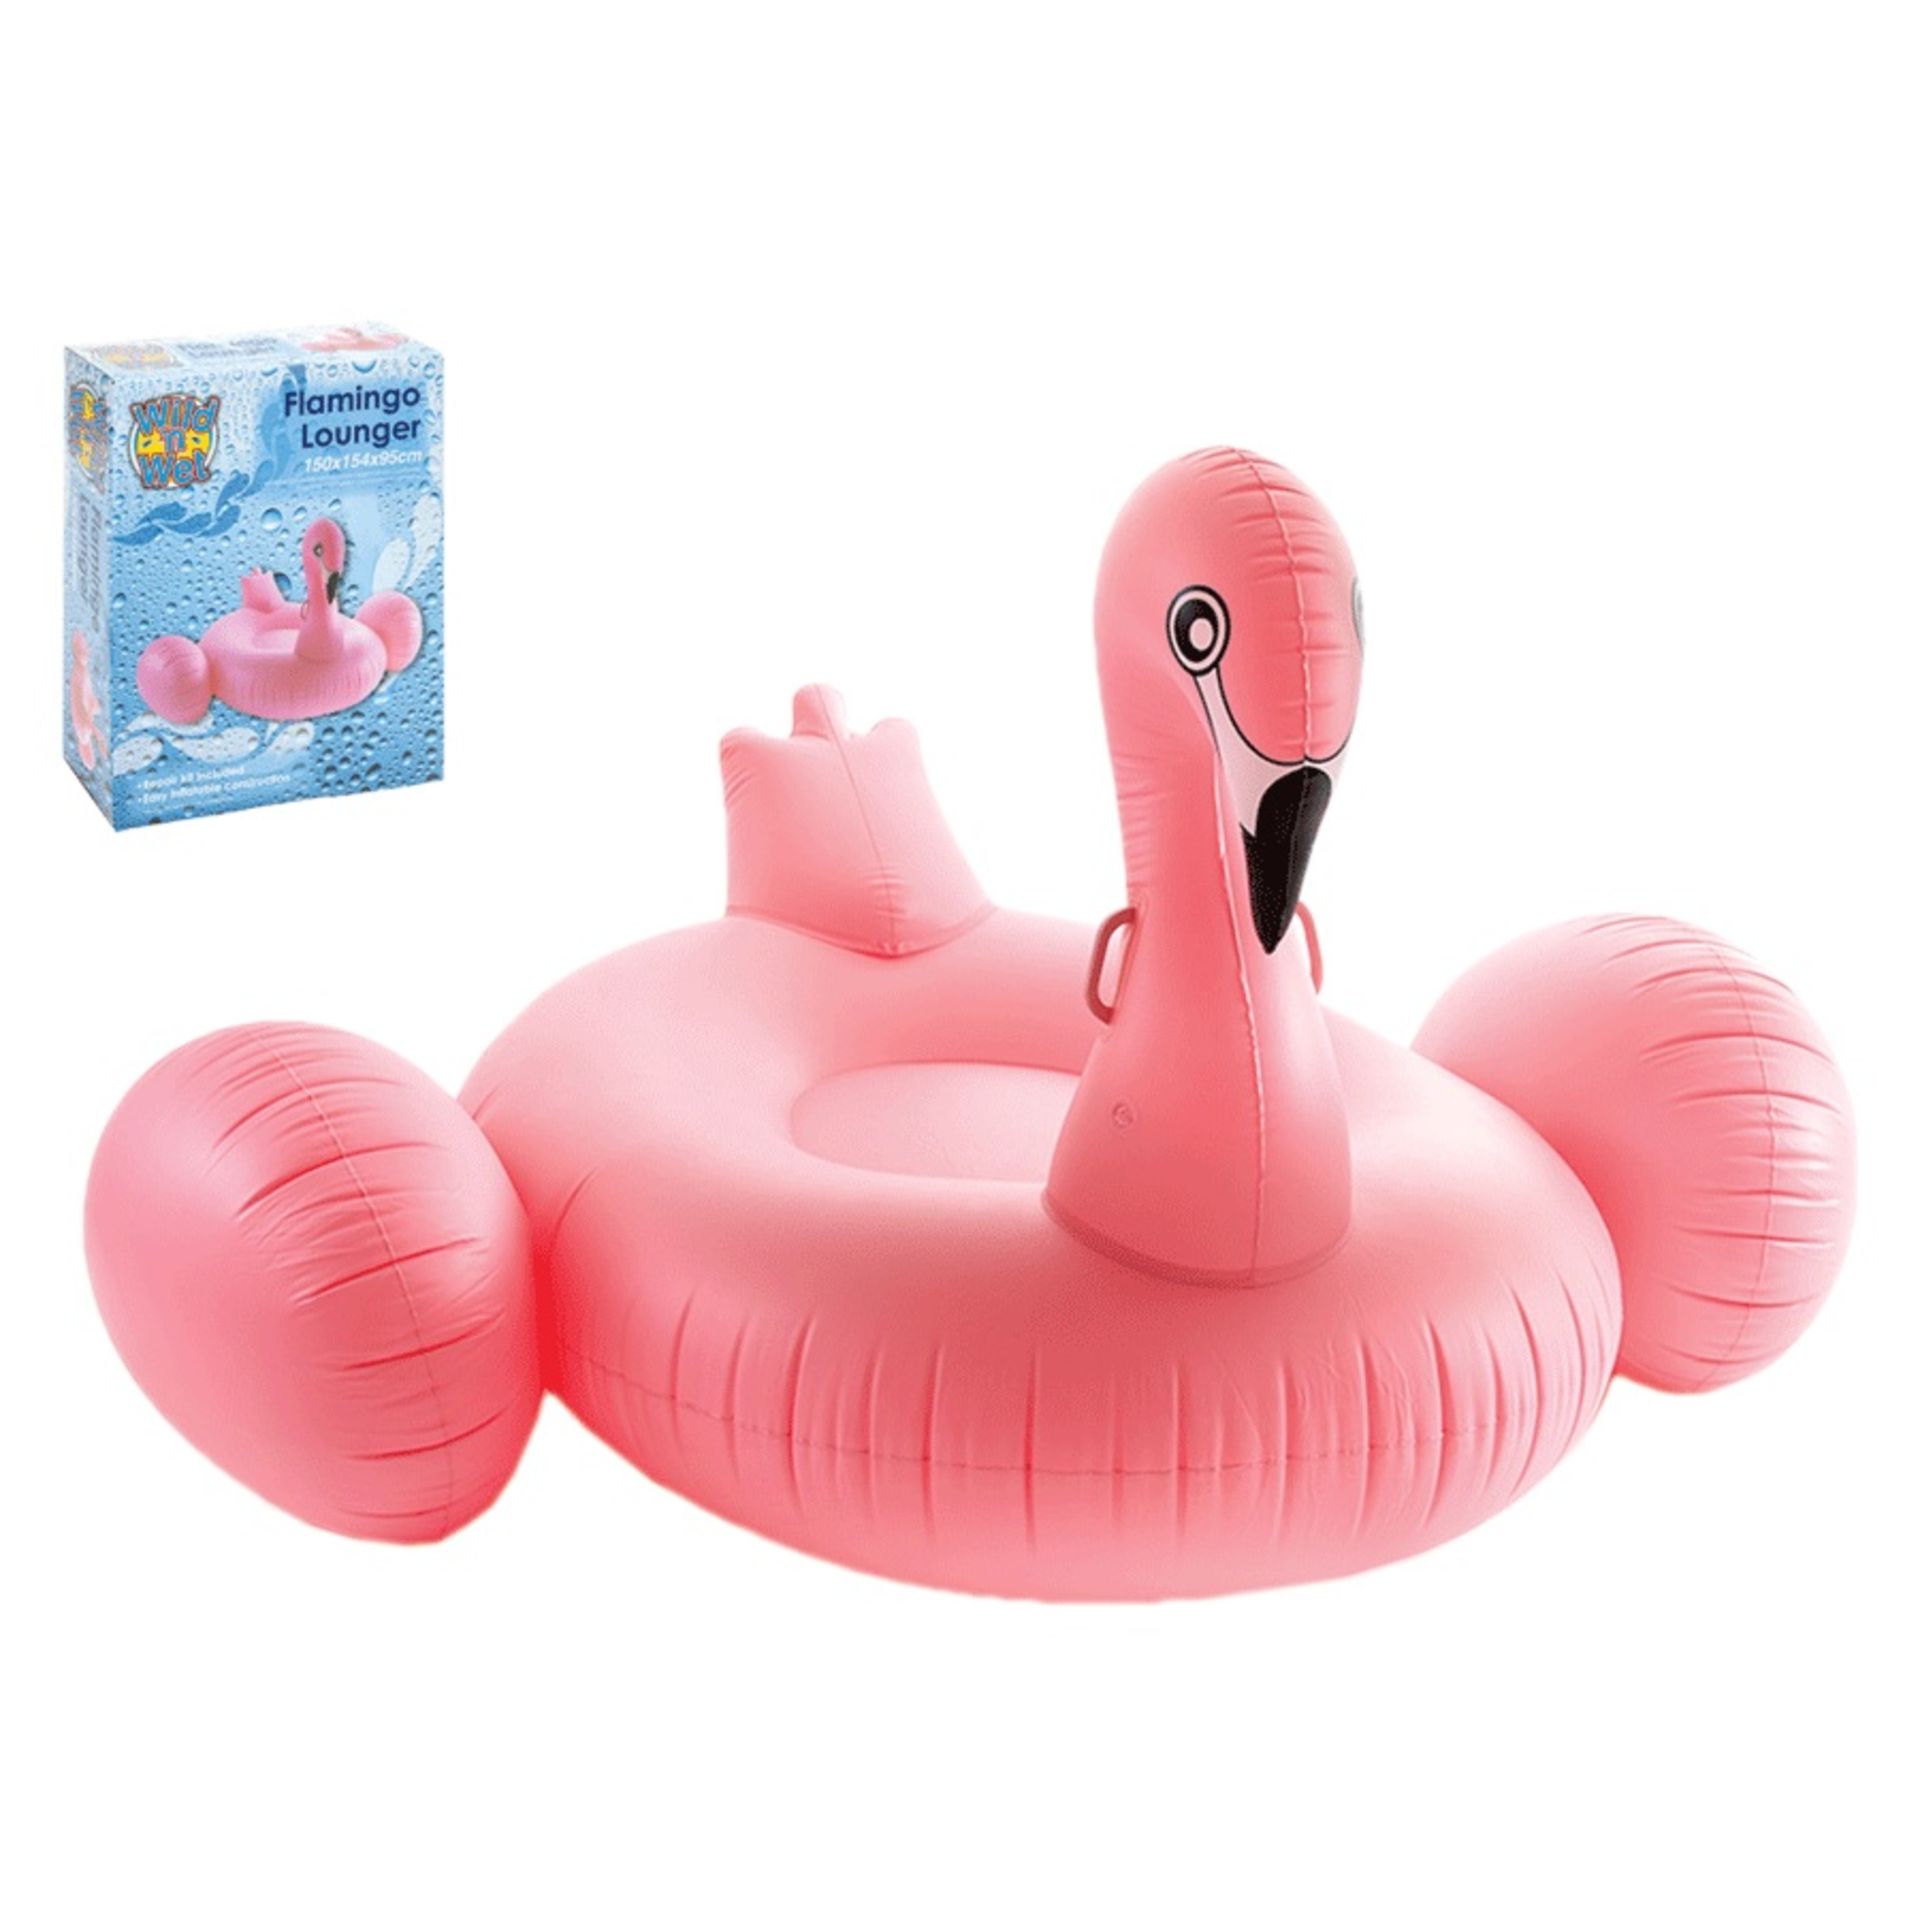 + VAT Brand New Inflatable Flamingo Lounger (150 x 154 x 95cm) - Repair Kit Included - Easy - Image 2 of 3